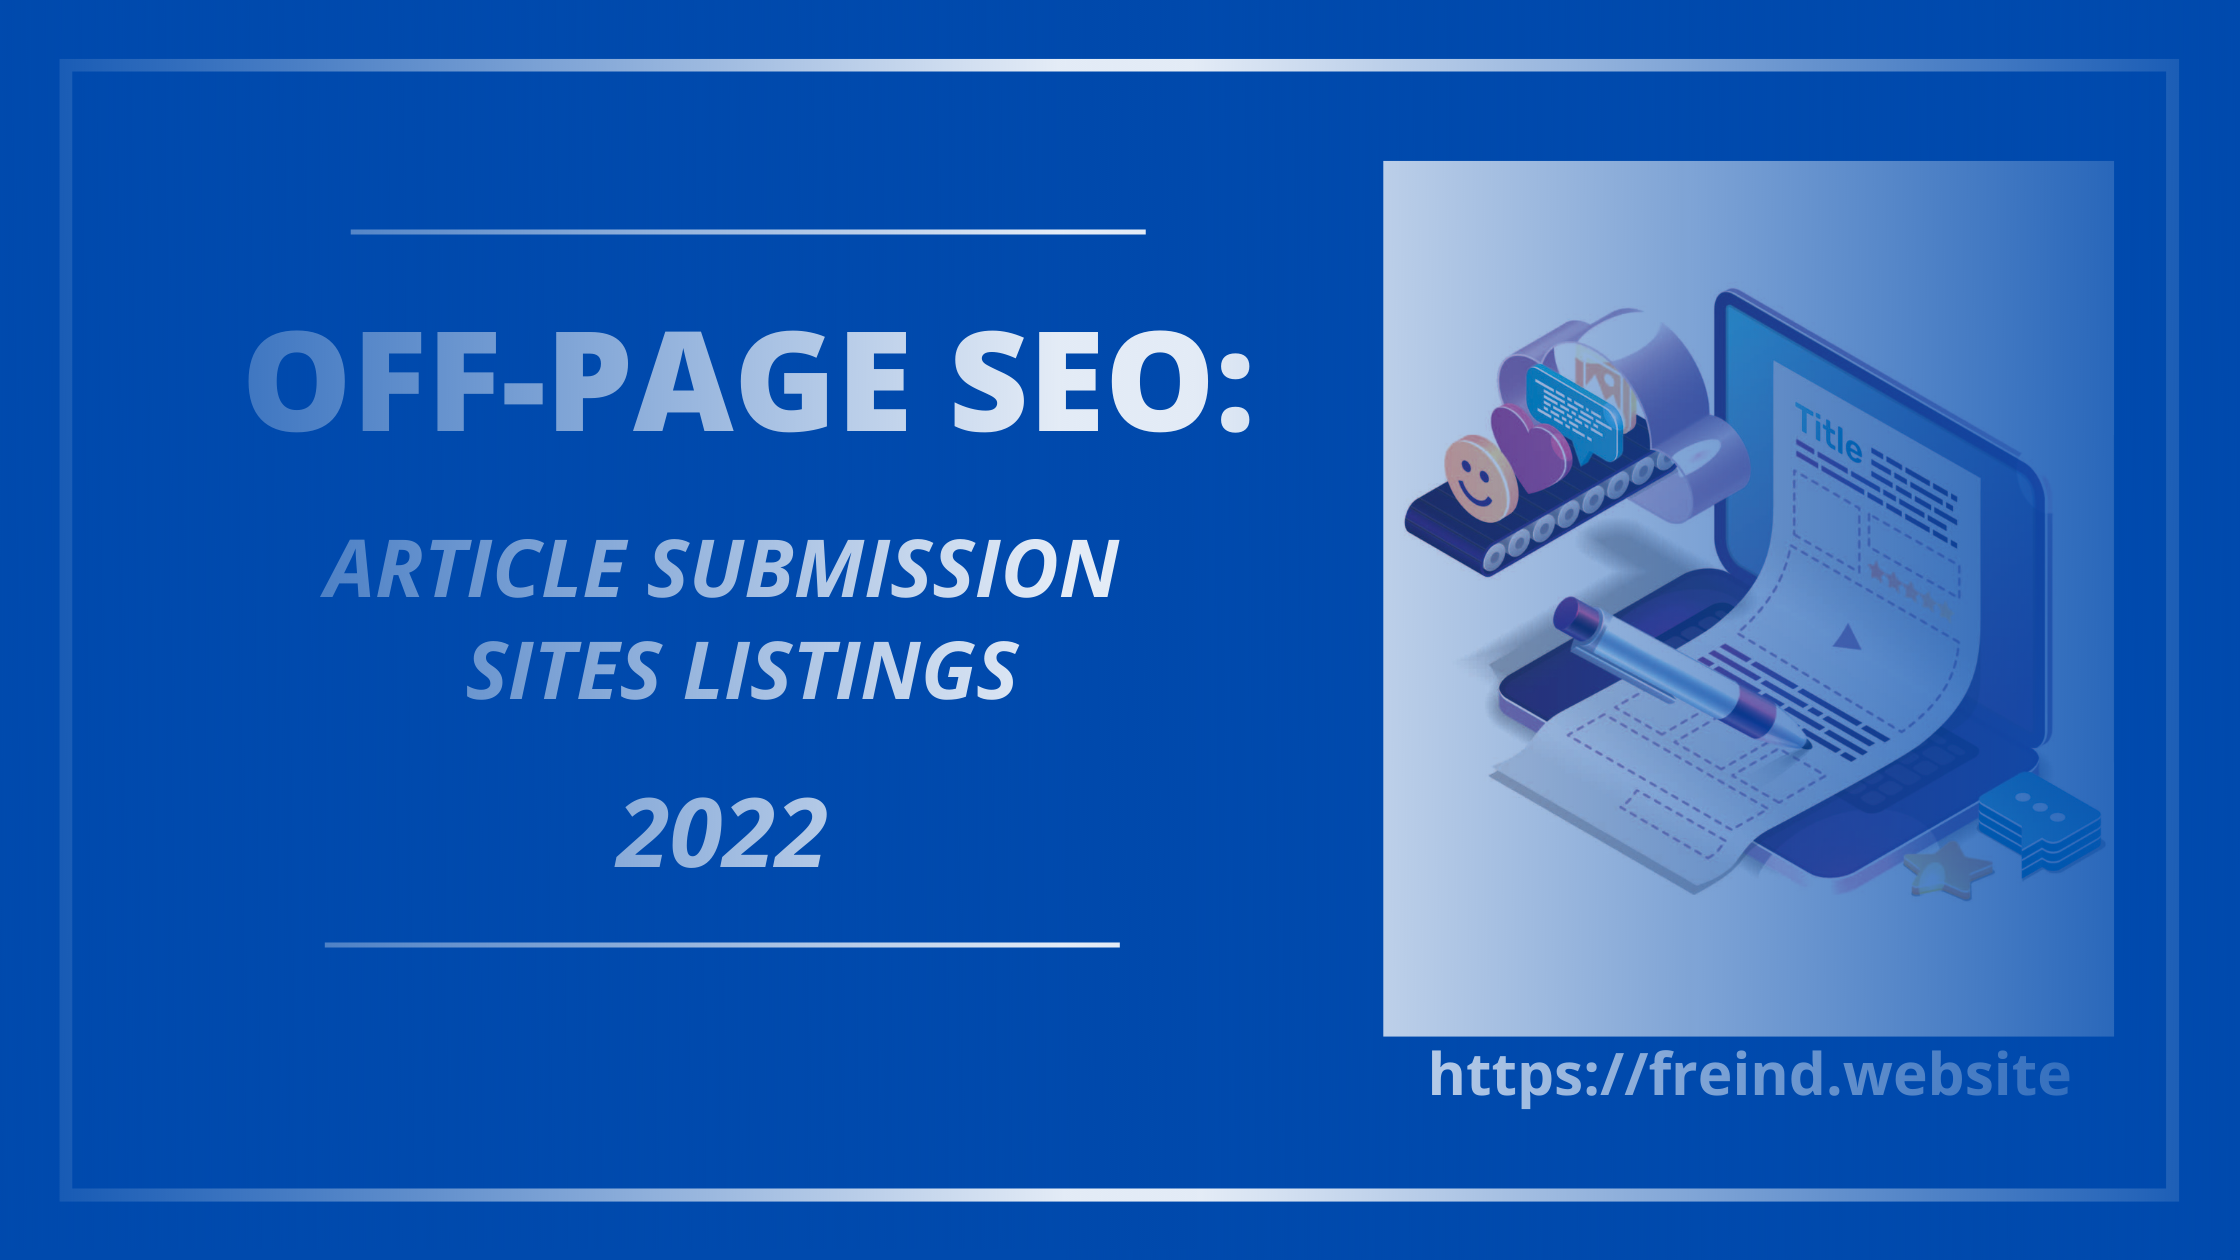 OFF-PAGE SEO:TOP ARTICLE SUBMISSION LISTING SITES